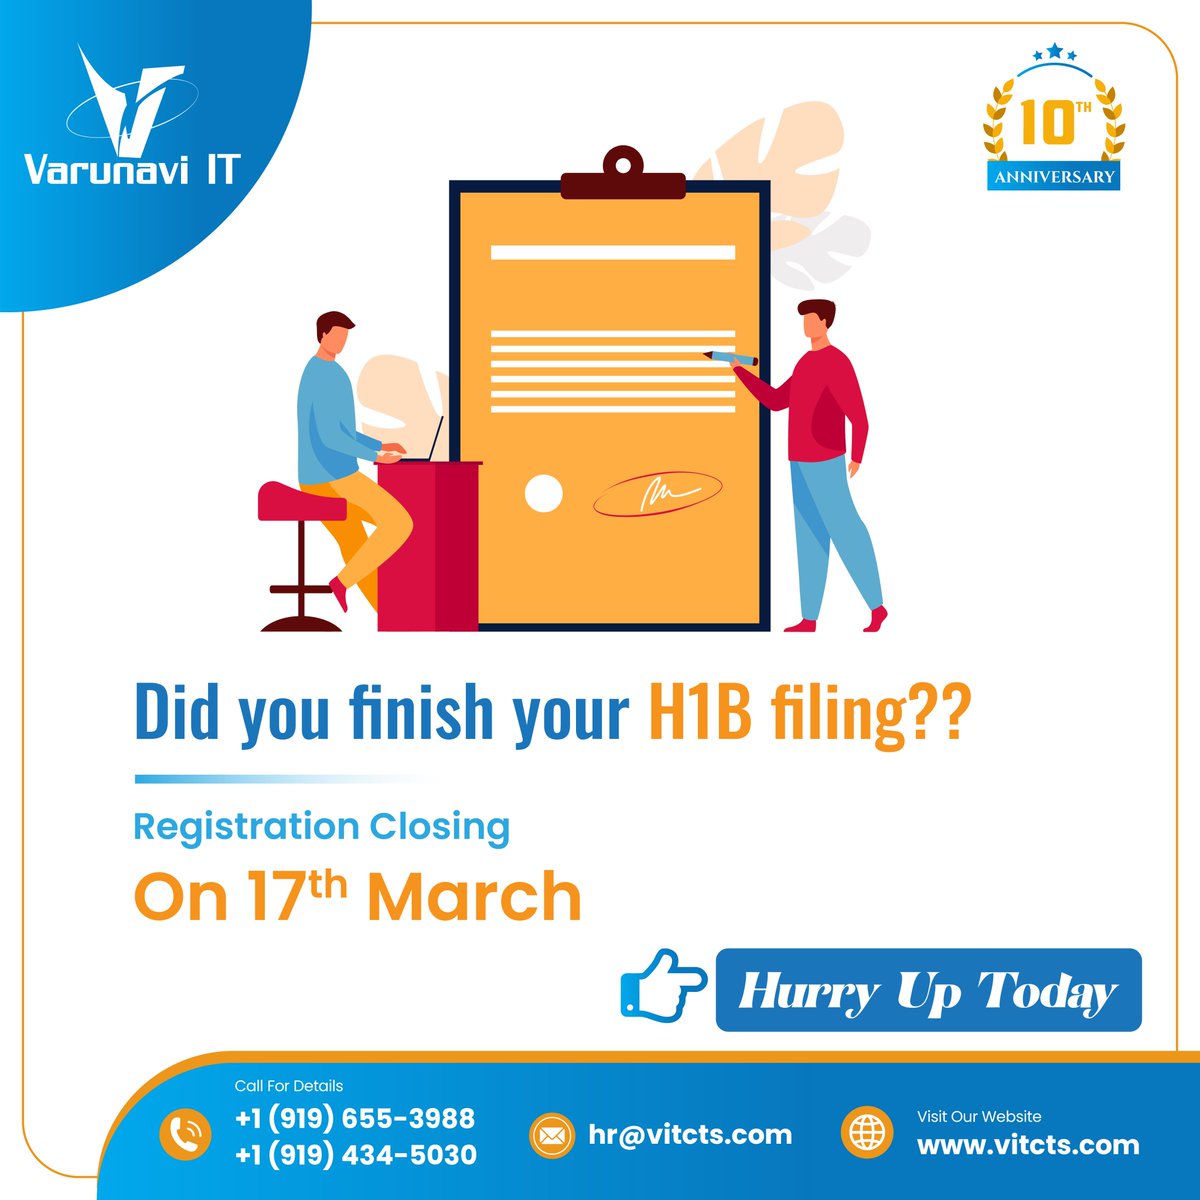 The time is ticking and registration closing on 17thMarch. Let our team file H1B and help you throughout the process. 

Call Us Today 

#H1B #H1BVisa #H1Bsponsorship
#vitcts 
#varunaviit
#varunaviitconsultants